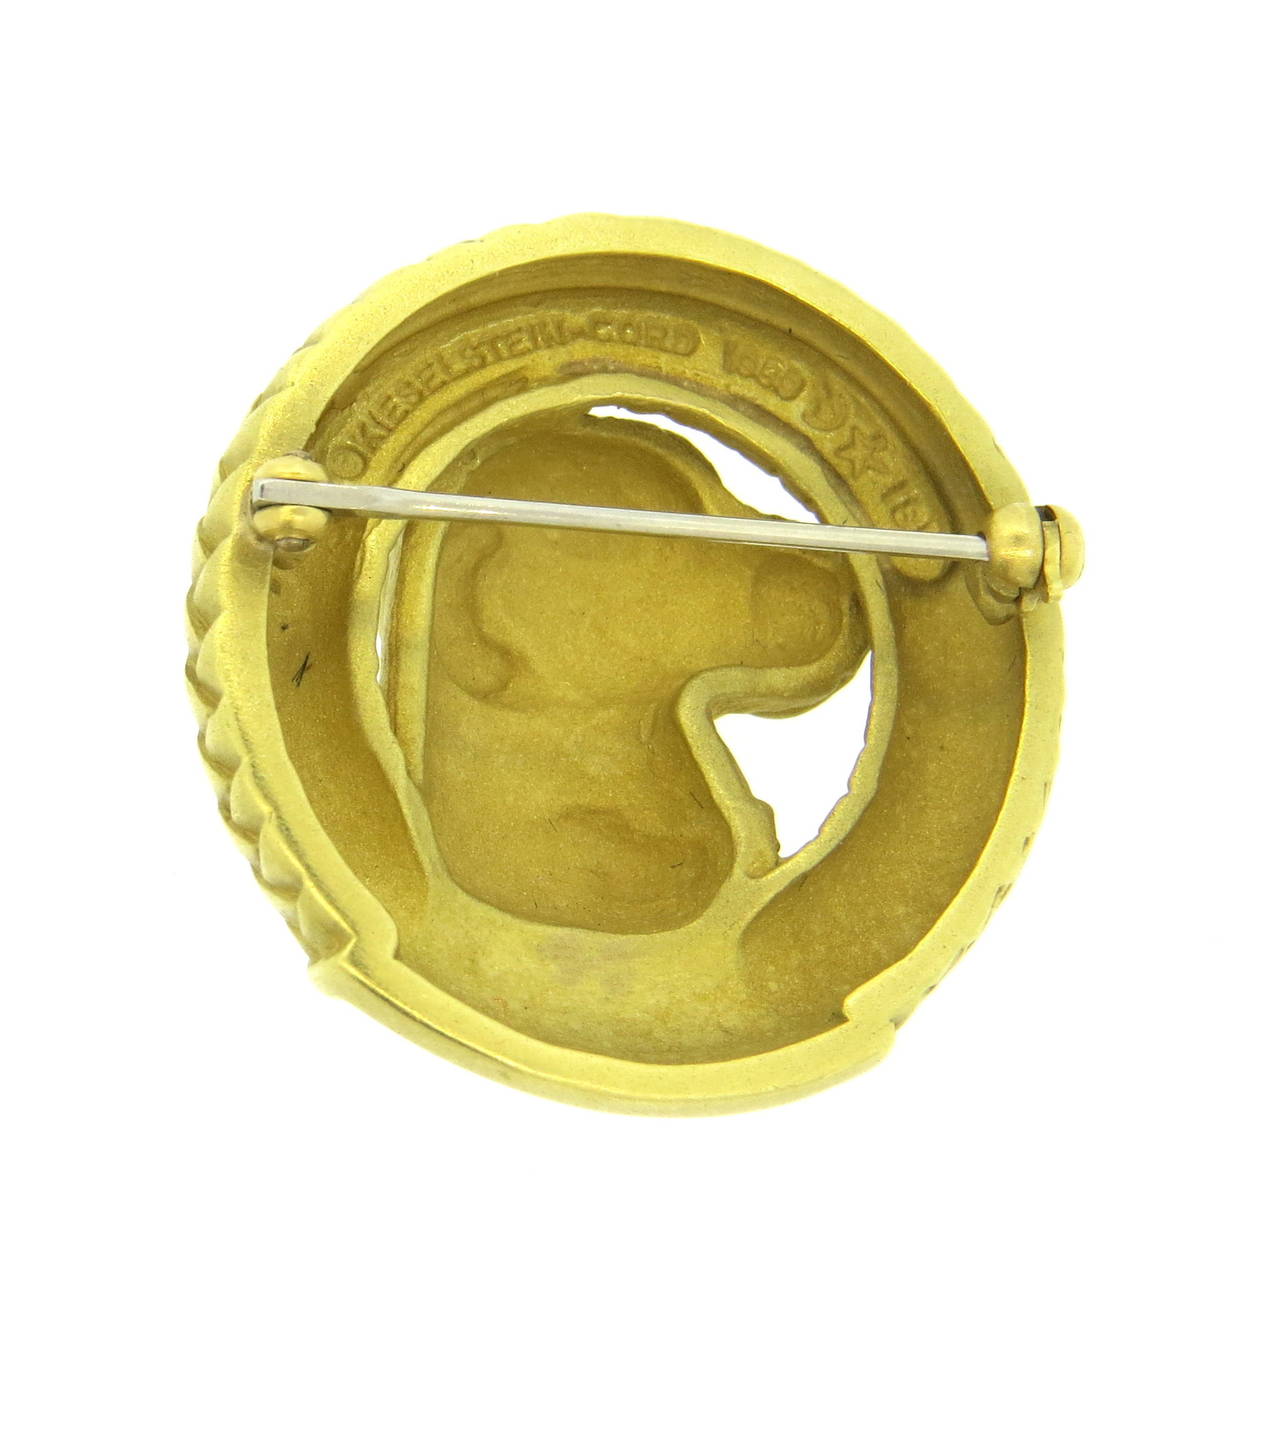 18k gold brooch, crafted by Barry Kieselstein-Cord, featuring labrador profile. Brooch is 30mm in diameter. Marked Kieselstein-Cord, 18k,makers hallmark. Weight of the piece - 23.9 grams